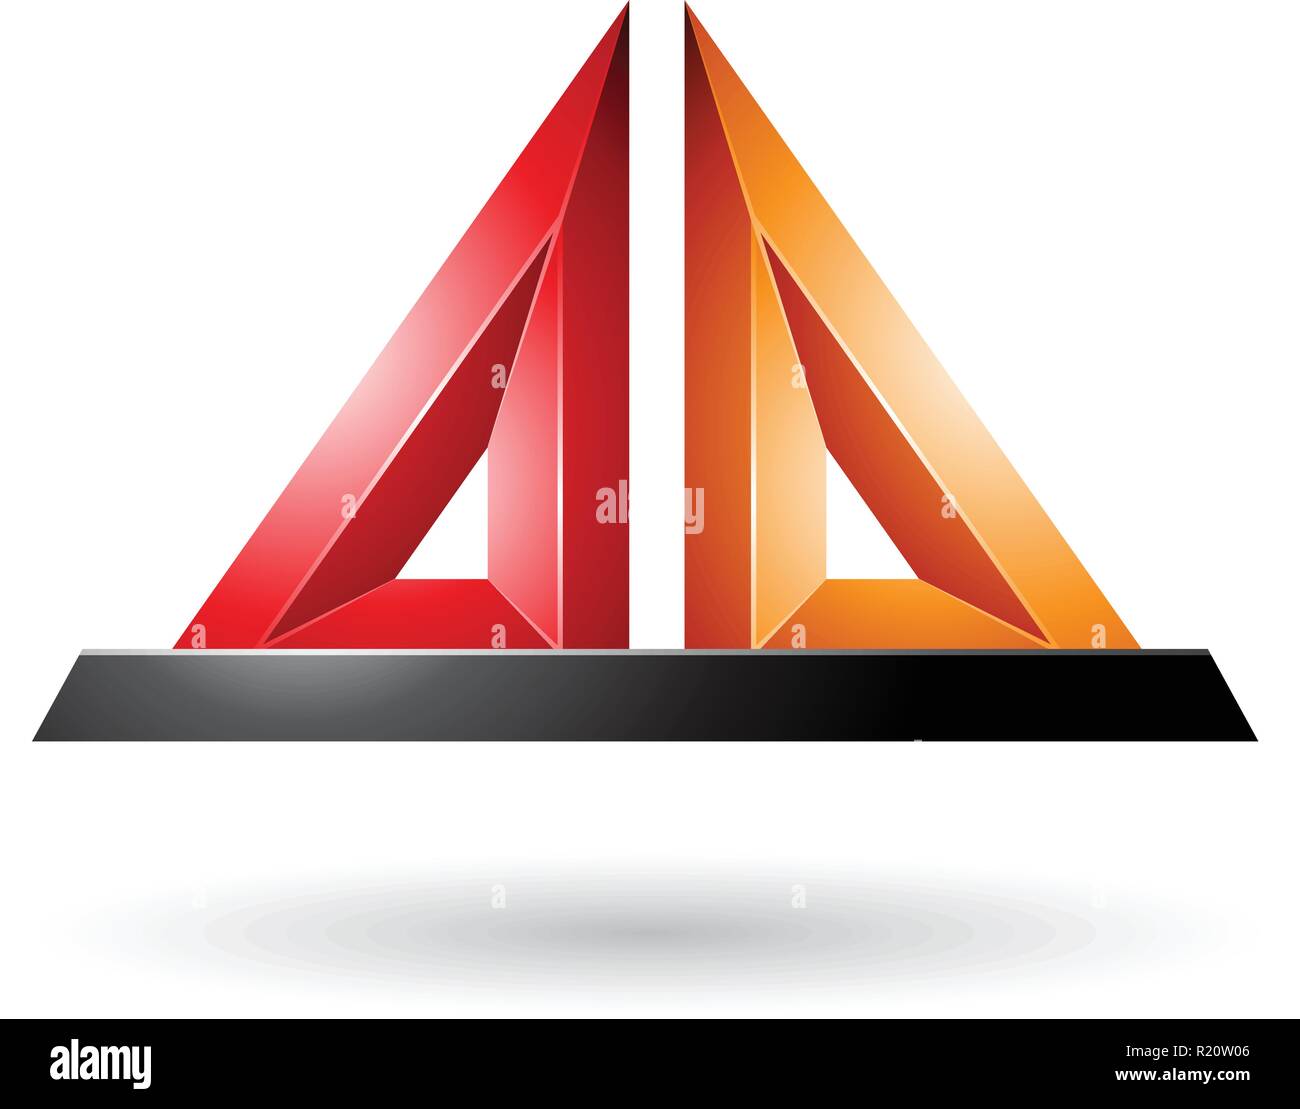 Vector Illustration of Red and Orange 3d Pyramidical Embossed Shape isolated on a White Background Stock Vector